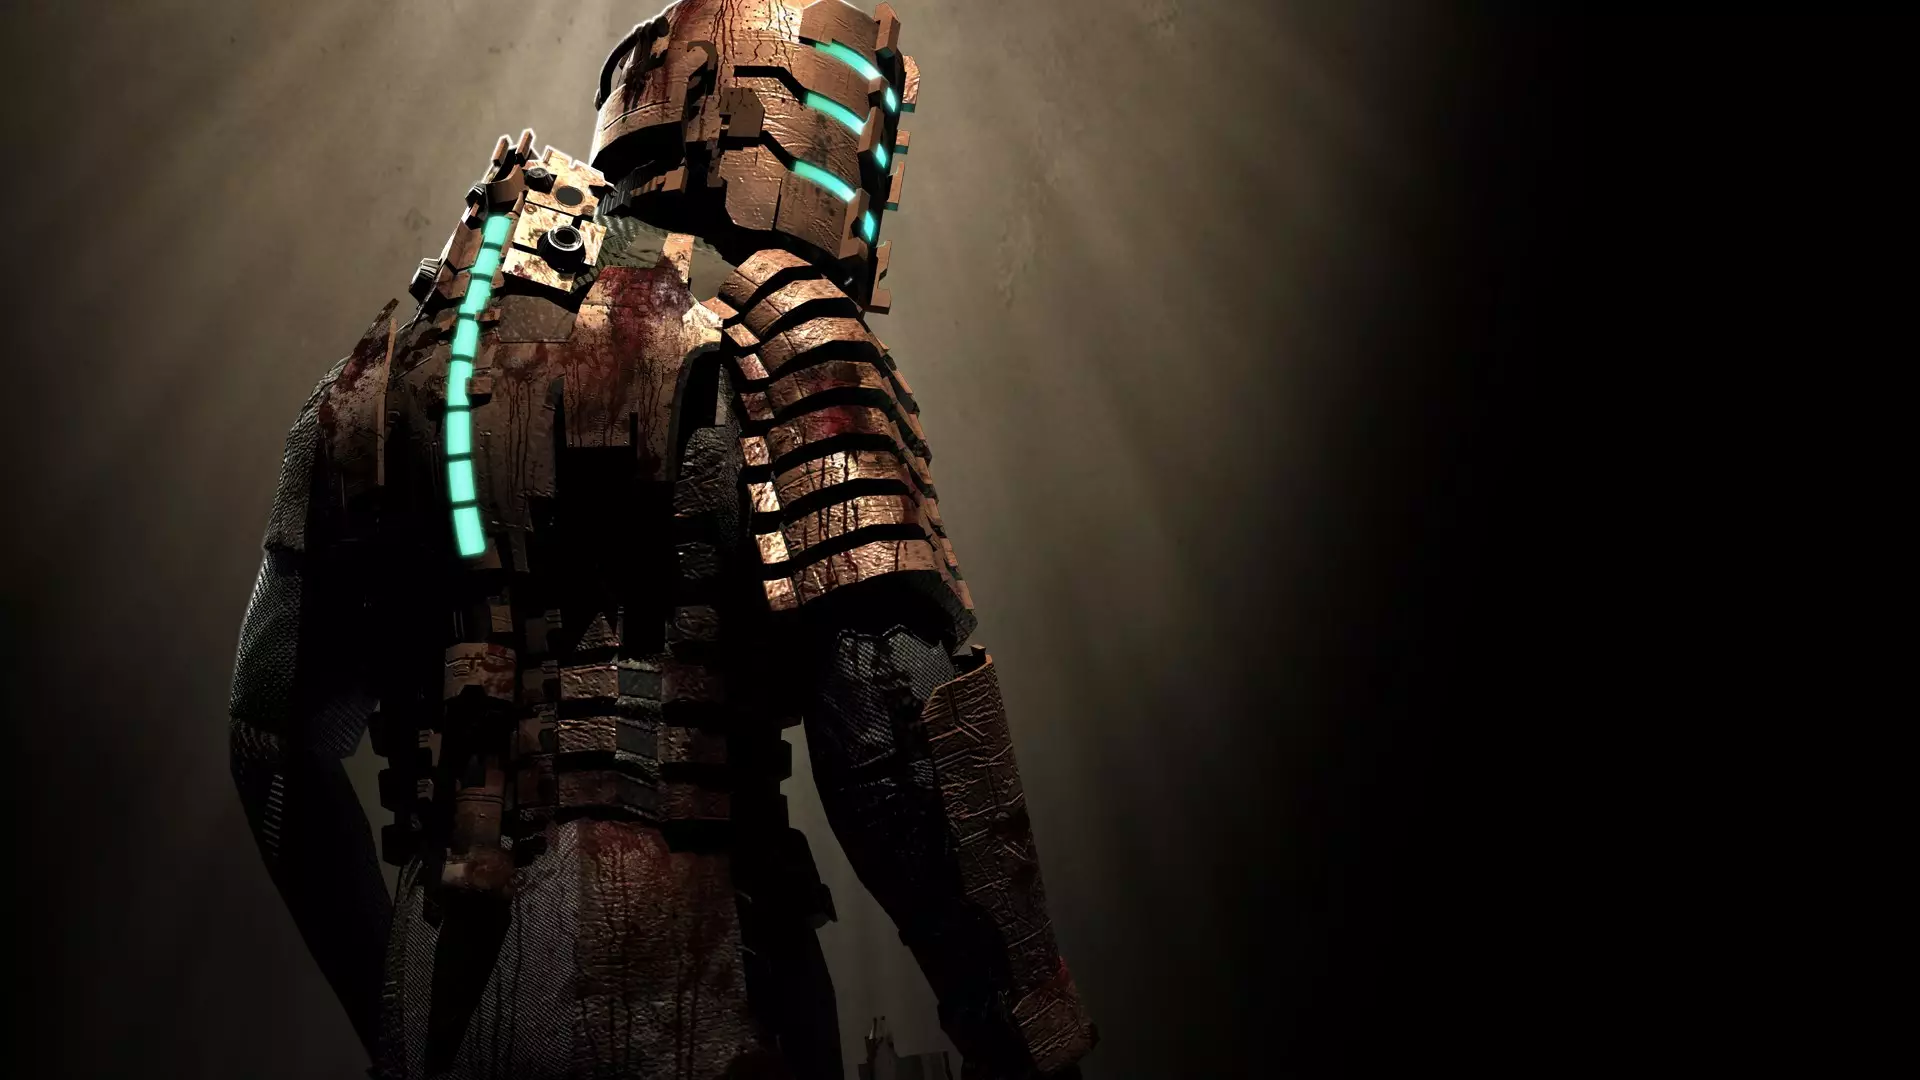 ​The Main Character In ‘Dead Space’ Has The Same Bones As Tiger Woods